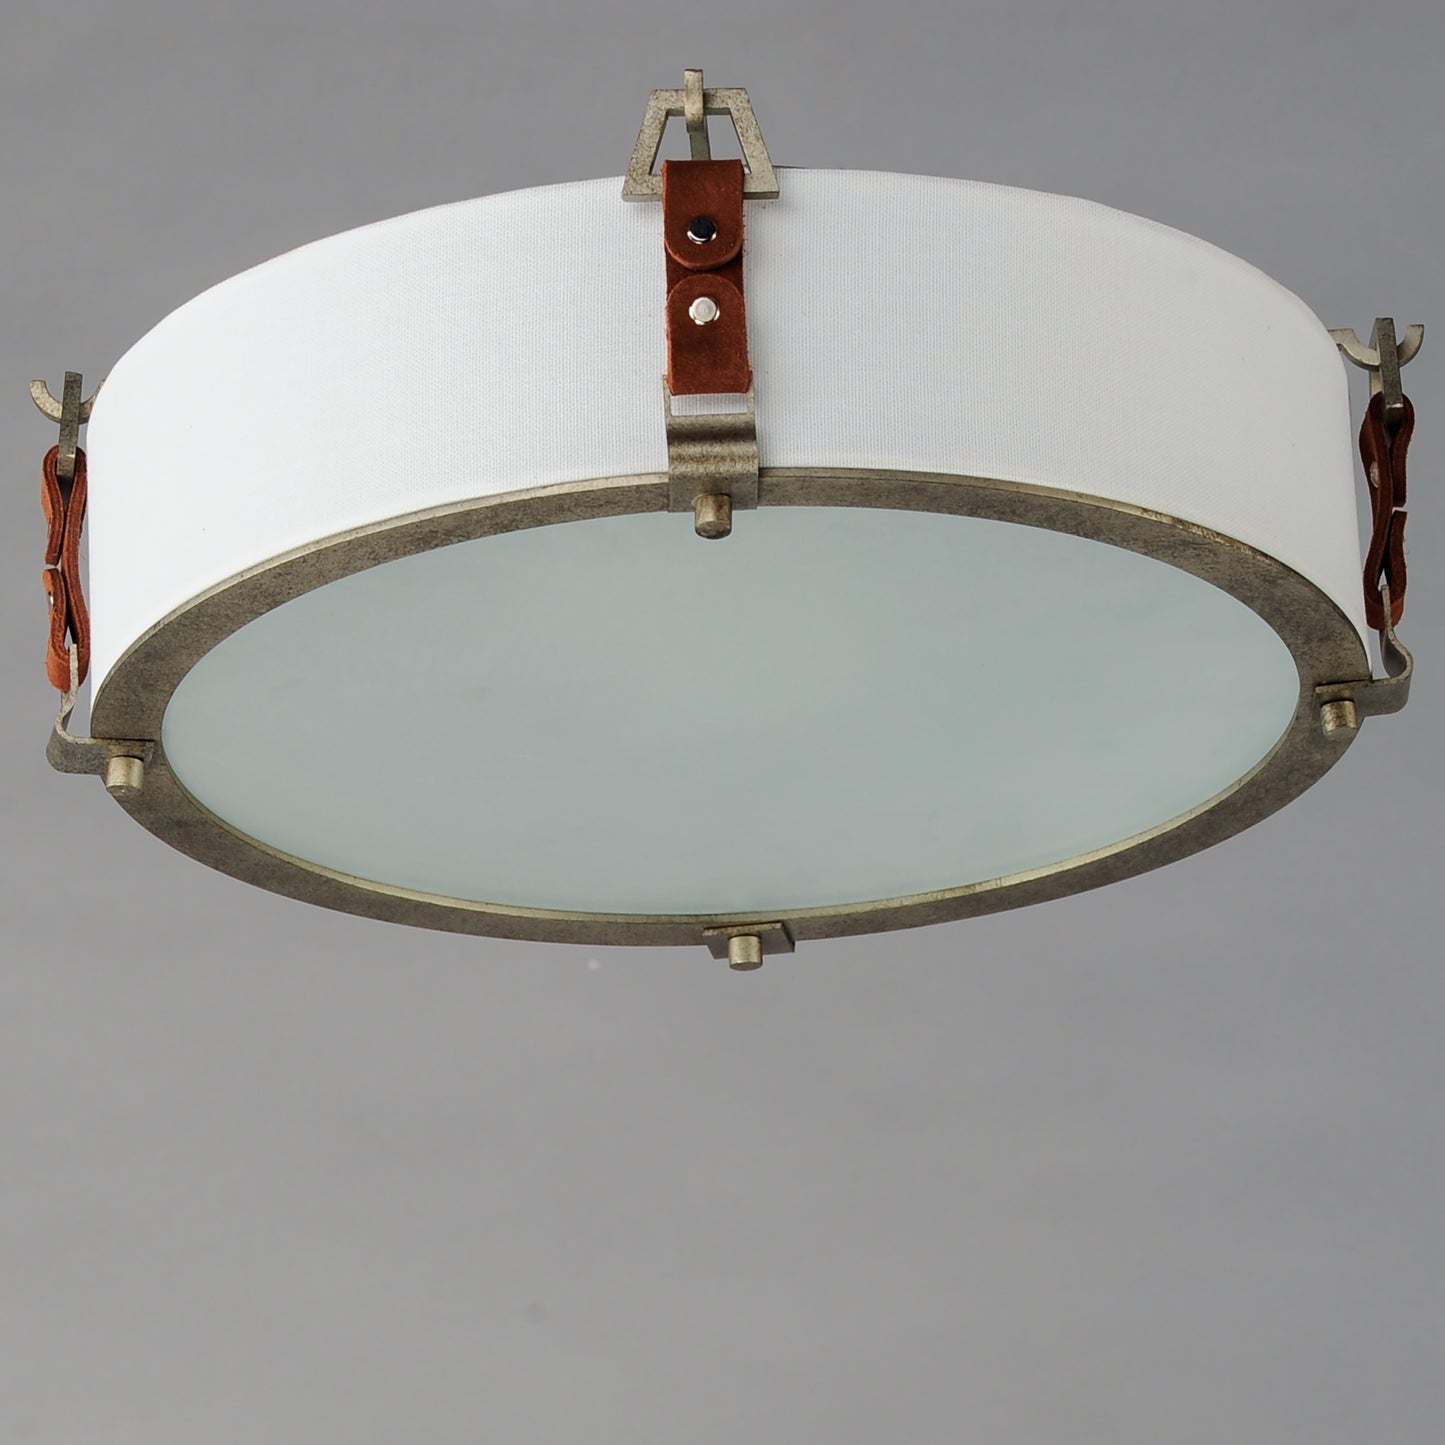 16130FTWZBSD - Sausalito 16" Flush Mount Ceiling Light - Weathered Zinc / Brown Suede